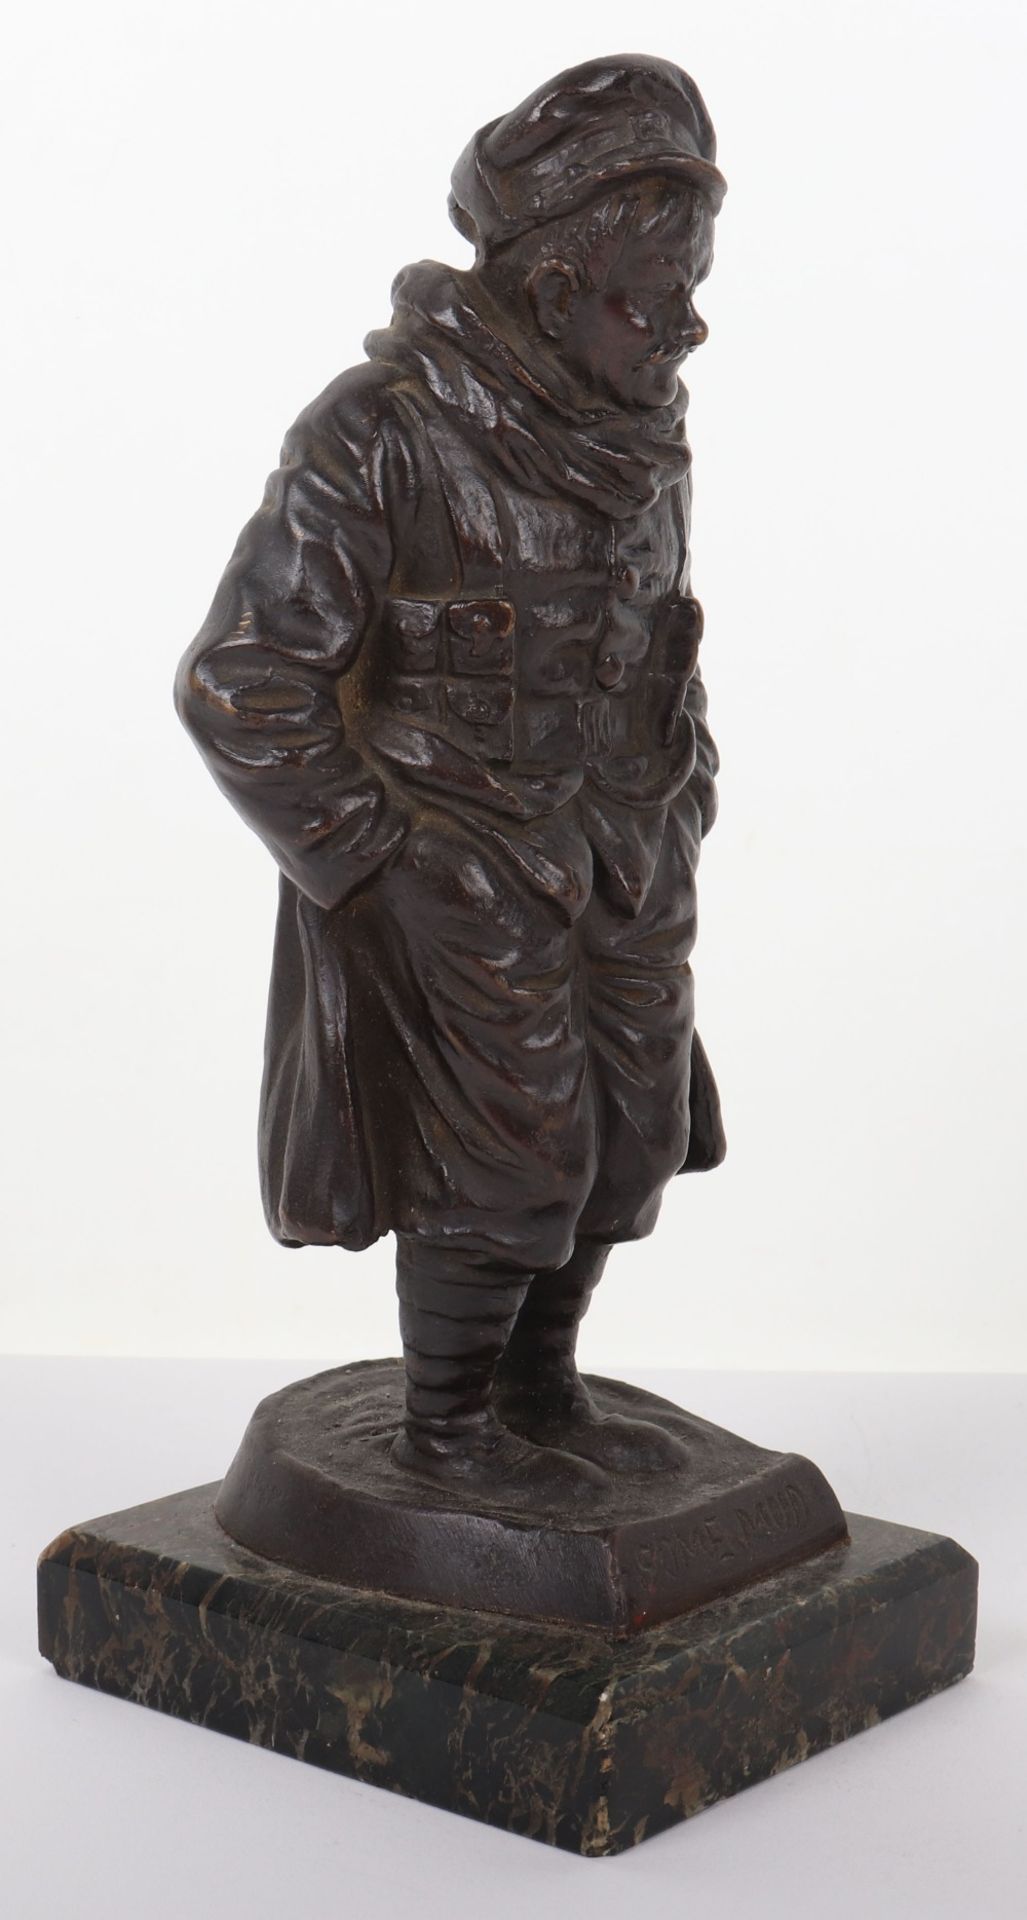 Bronze Figure of a WW1 British Tommy in the Bruce Bairnsfather “Old Bill” Style - Image 3 of 7